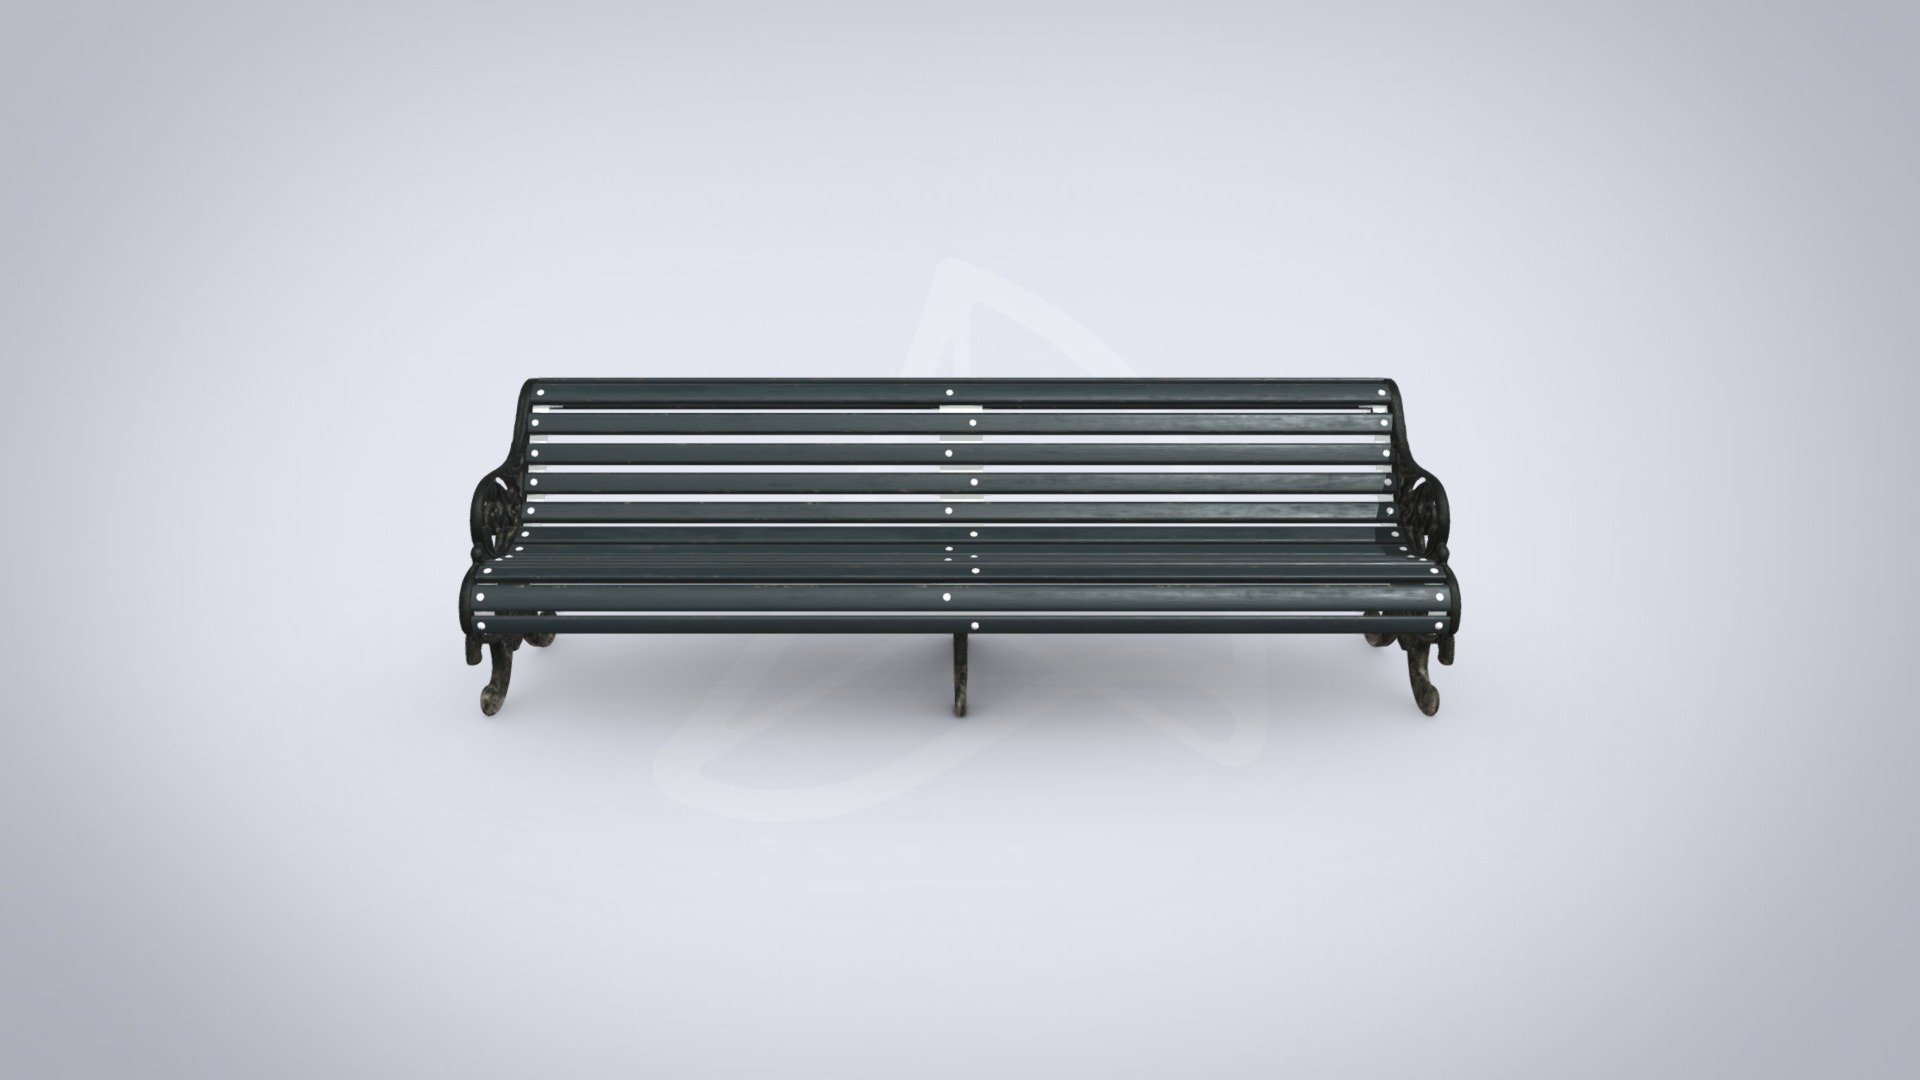 Ornate Victorian cast iron park bench in Regent's Park, London, UK and replicated in many other parks around the word - Dark Bench - Buy Royalty Free 3D model by shu_digital 3d model